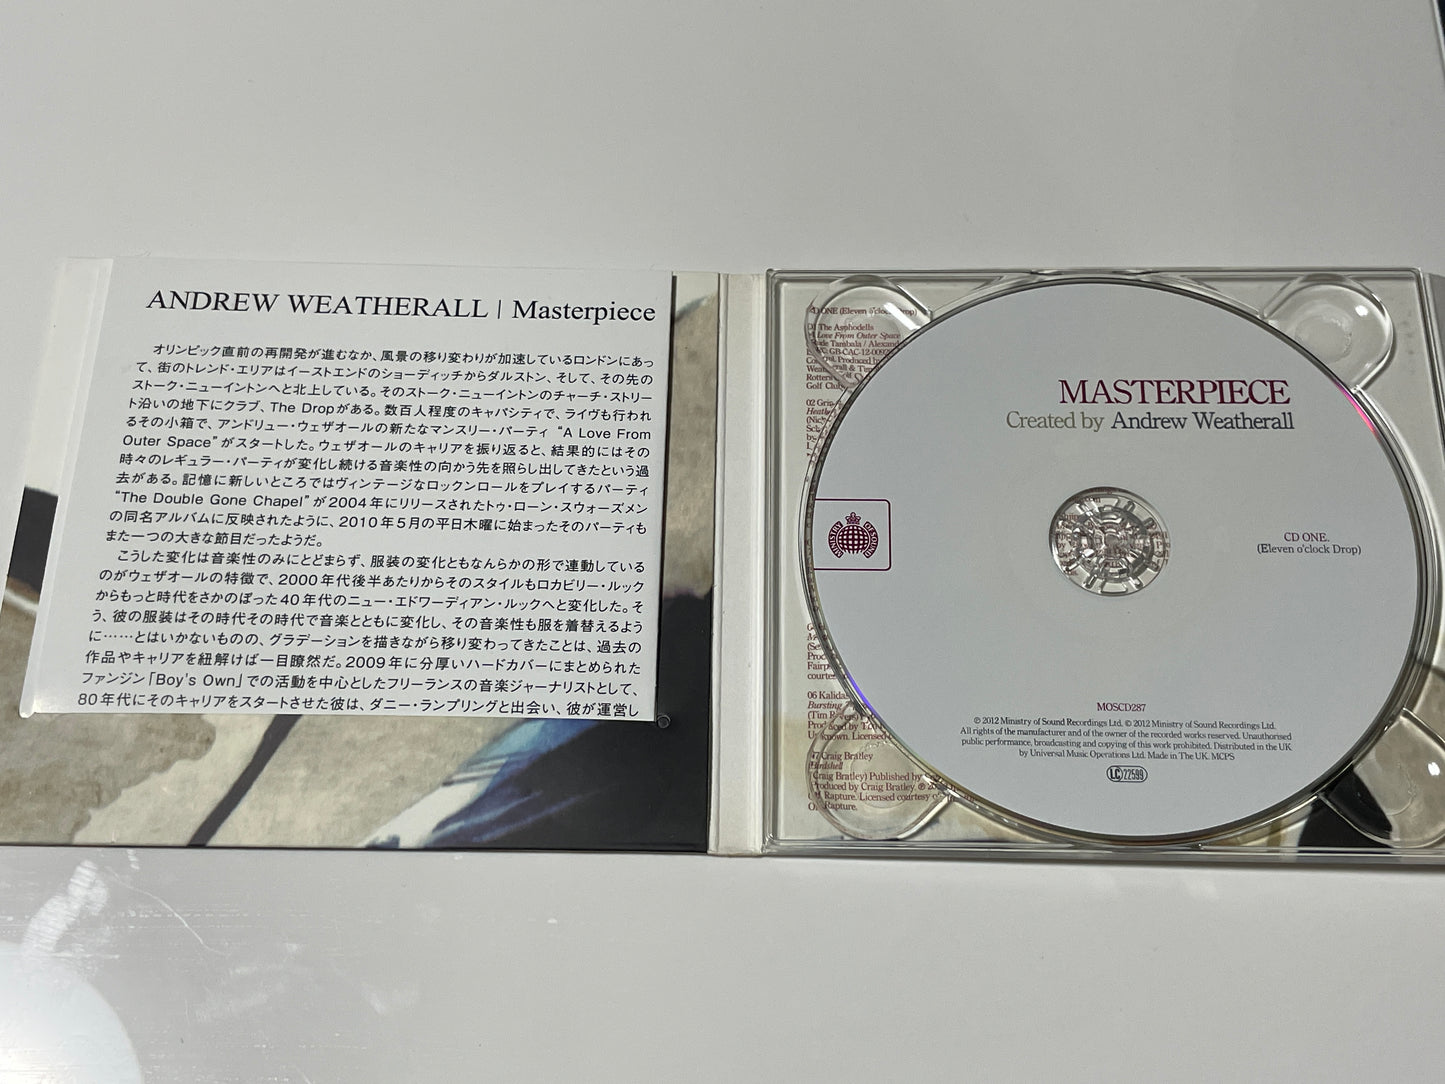 Andrew Weatherall Masterpiece Japanese CD 3×CD